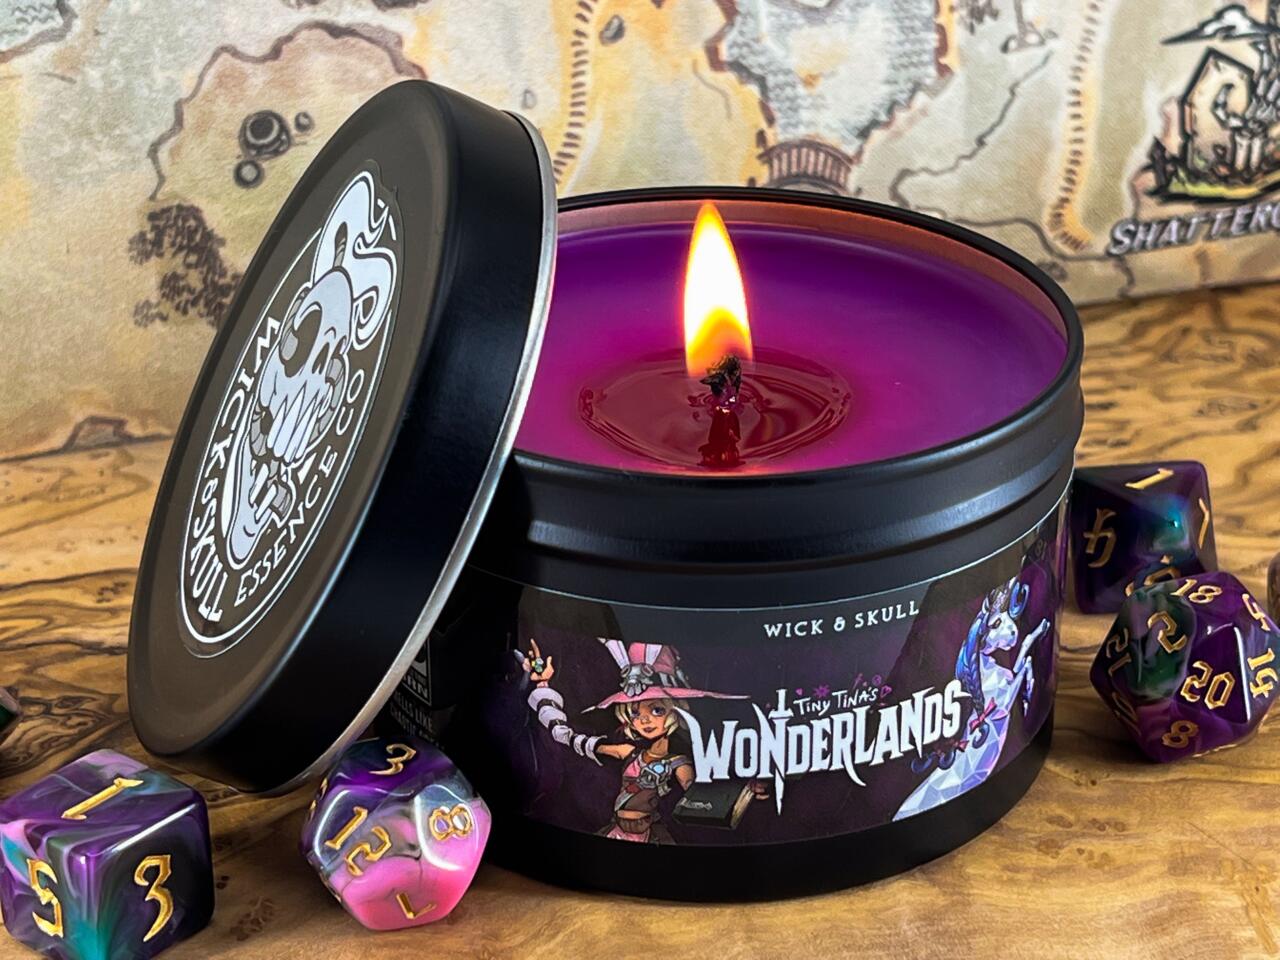 The Tiny Tina's Wonderlands candles smells like something Tina herself would've picked out for a game of Bunkers and Badasses.